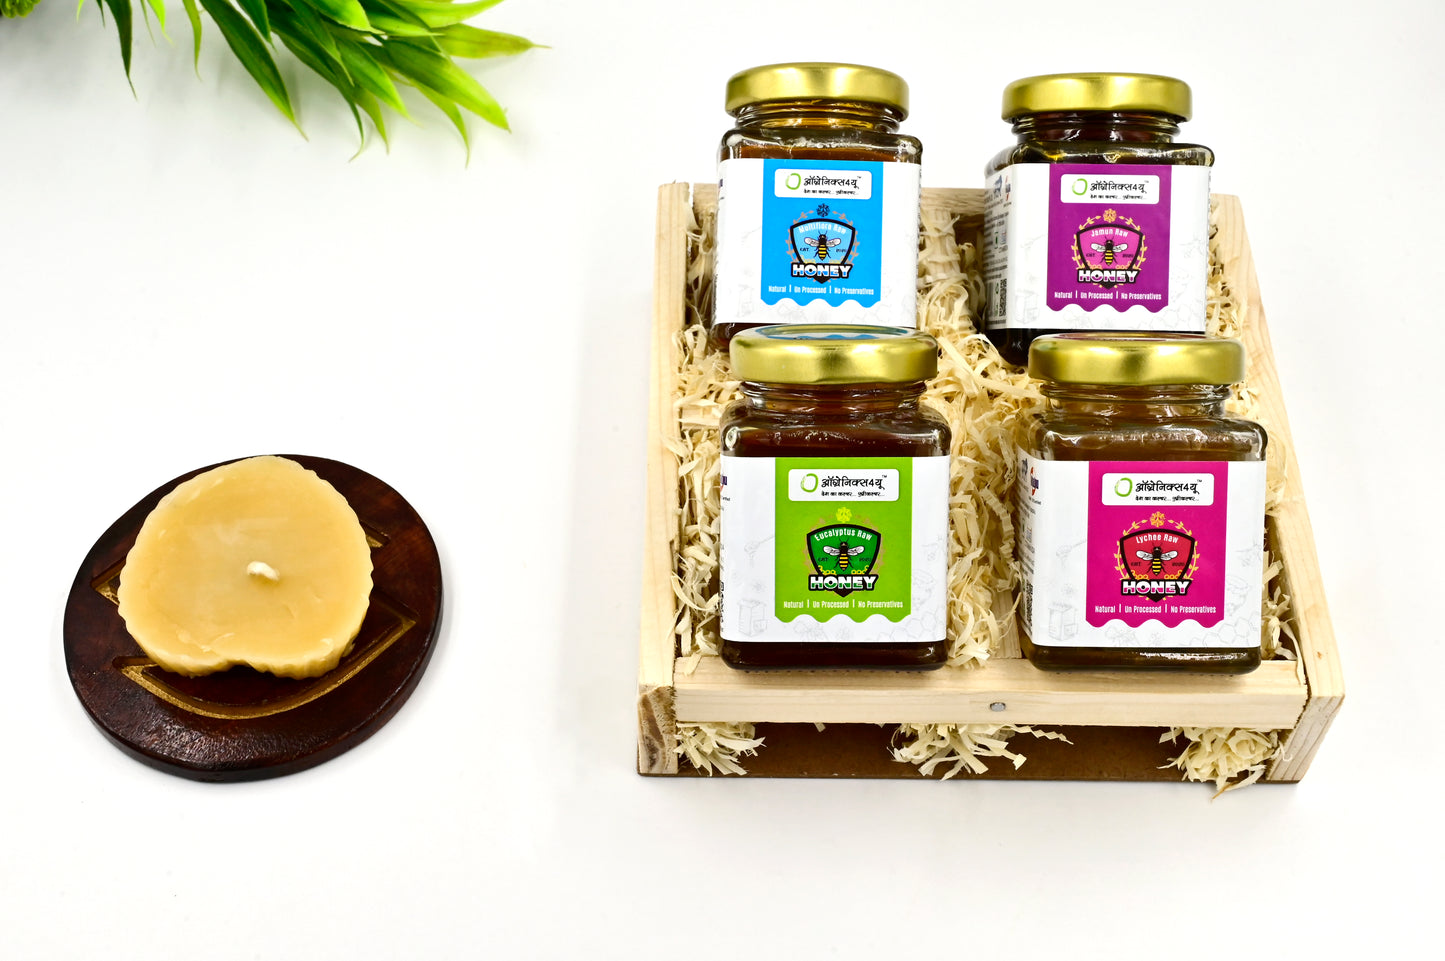 Organics4U’s Festive Gift Hamper New |4 Varities of Honey with a Postcard | Best Honey Pack for Gift Items | Gifts for Family and Friends